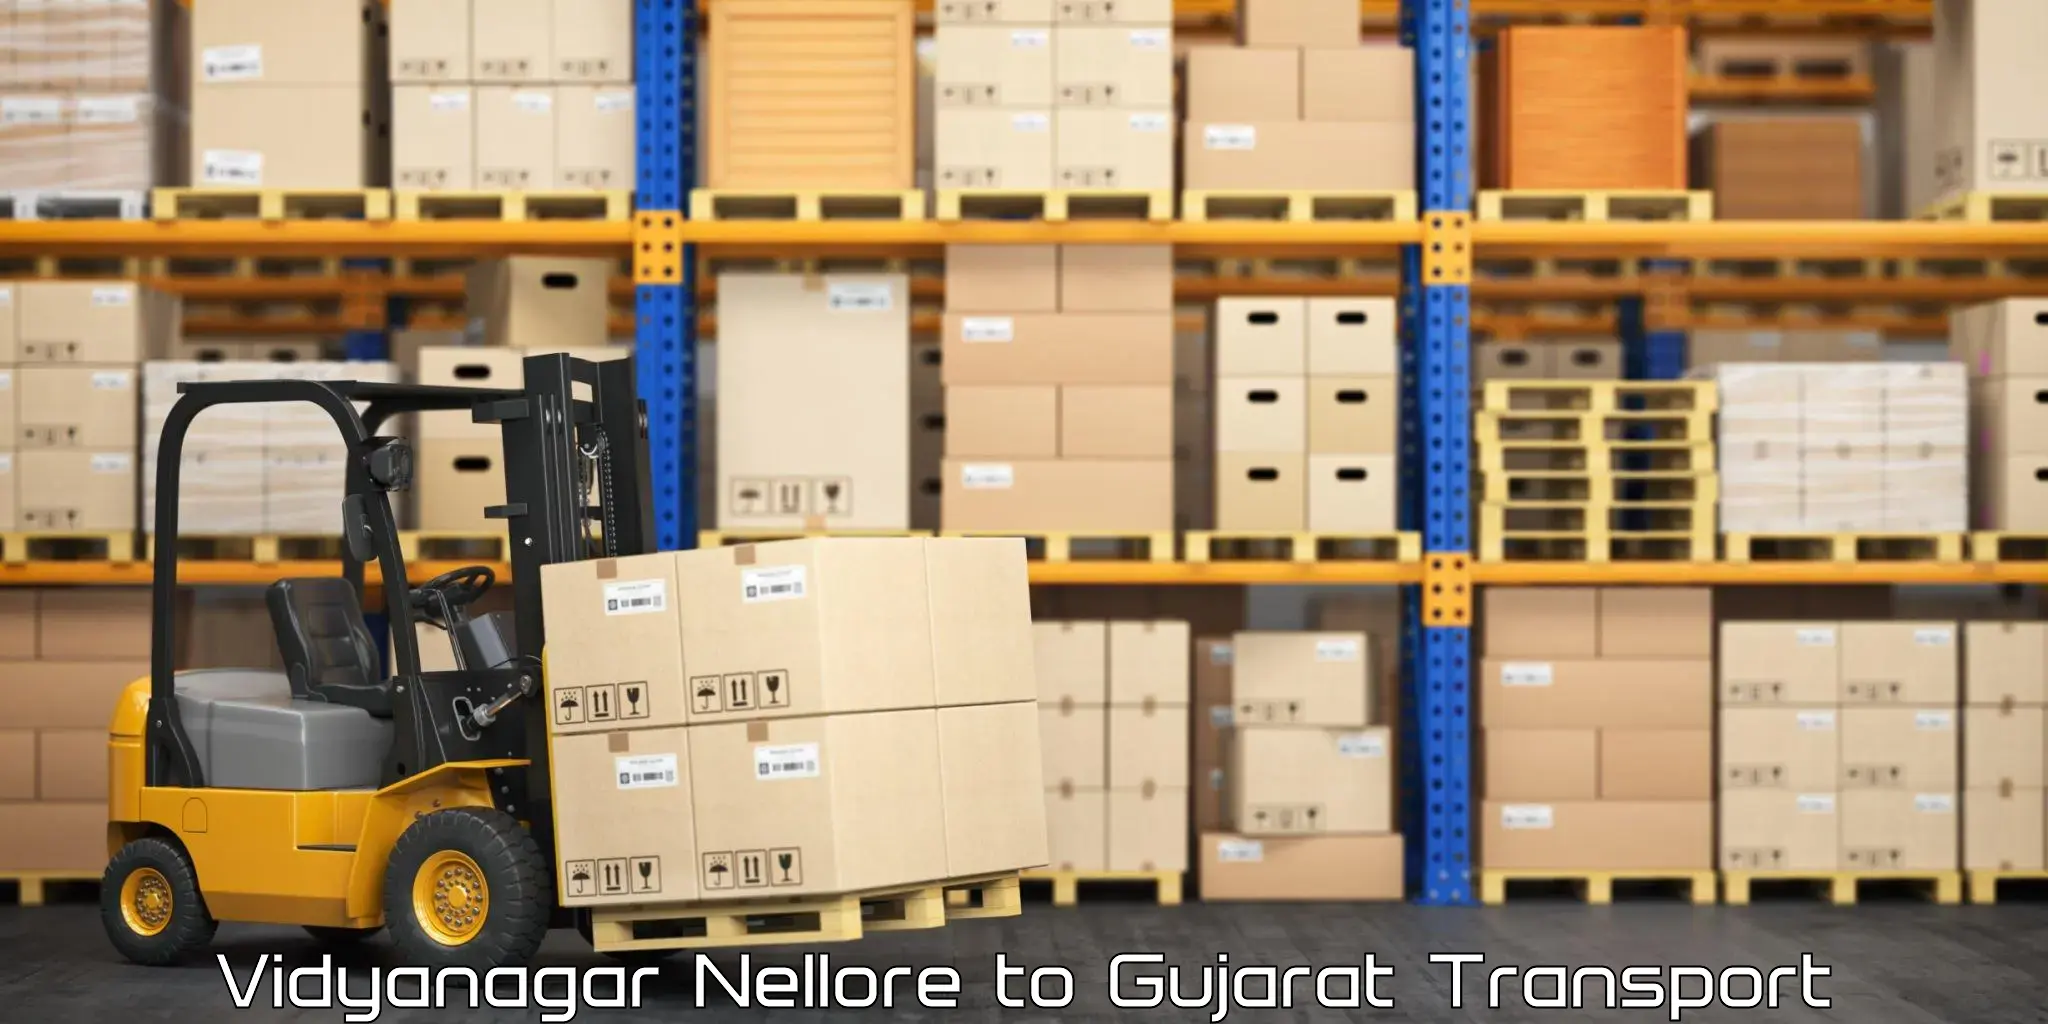 Luggage transport services Vidyanagar Nellore to Anand